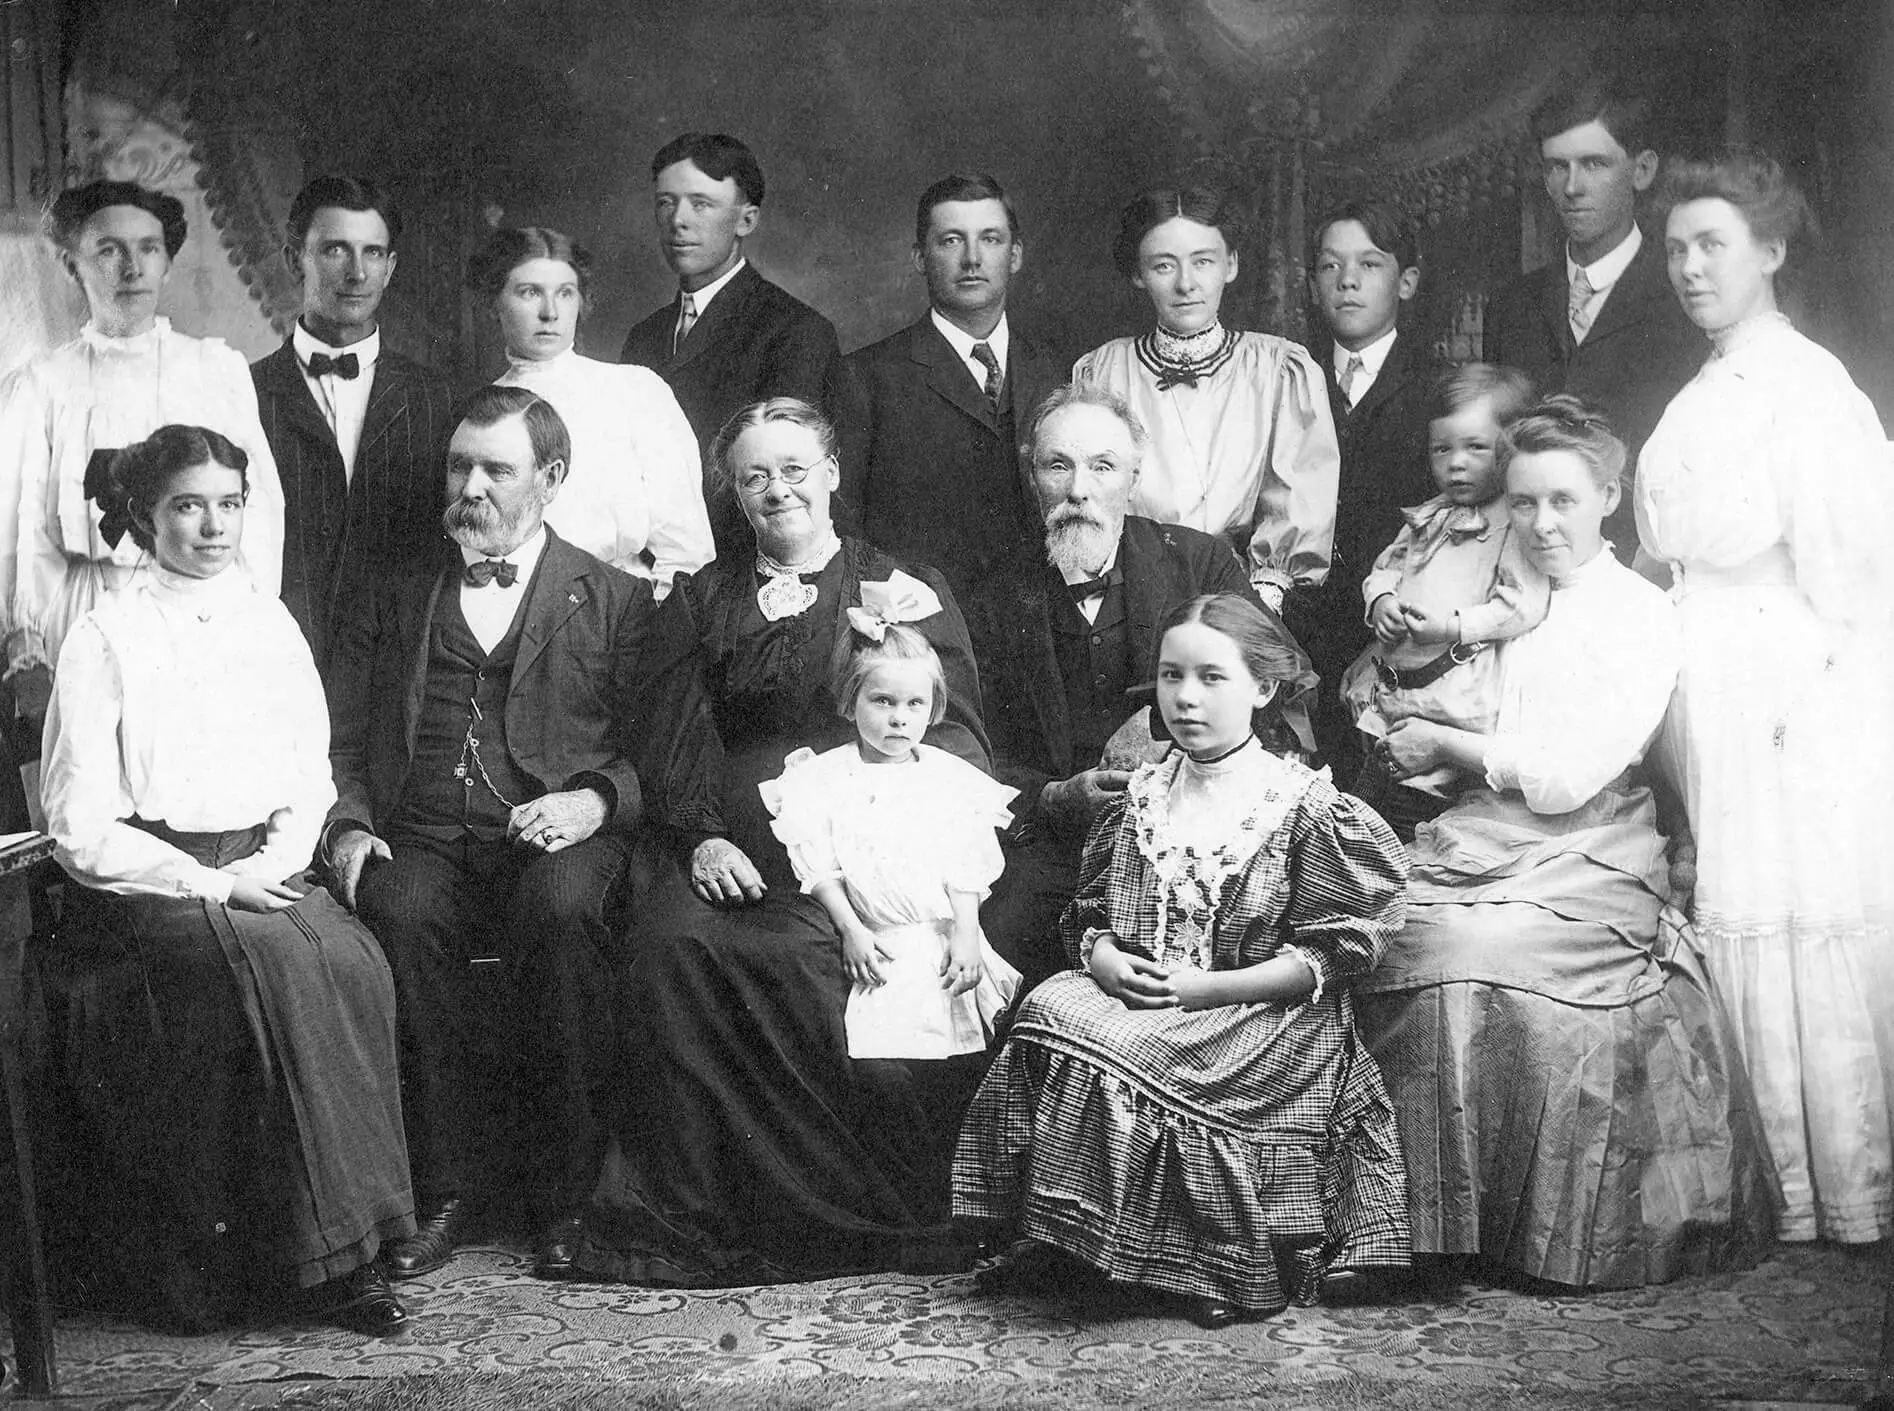 Black and white photo of 17 members of the family, dressed formally.